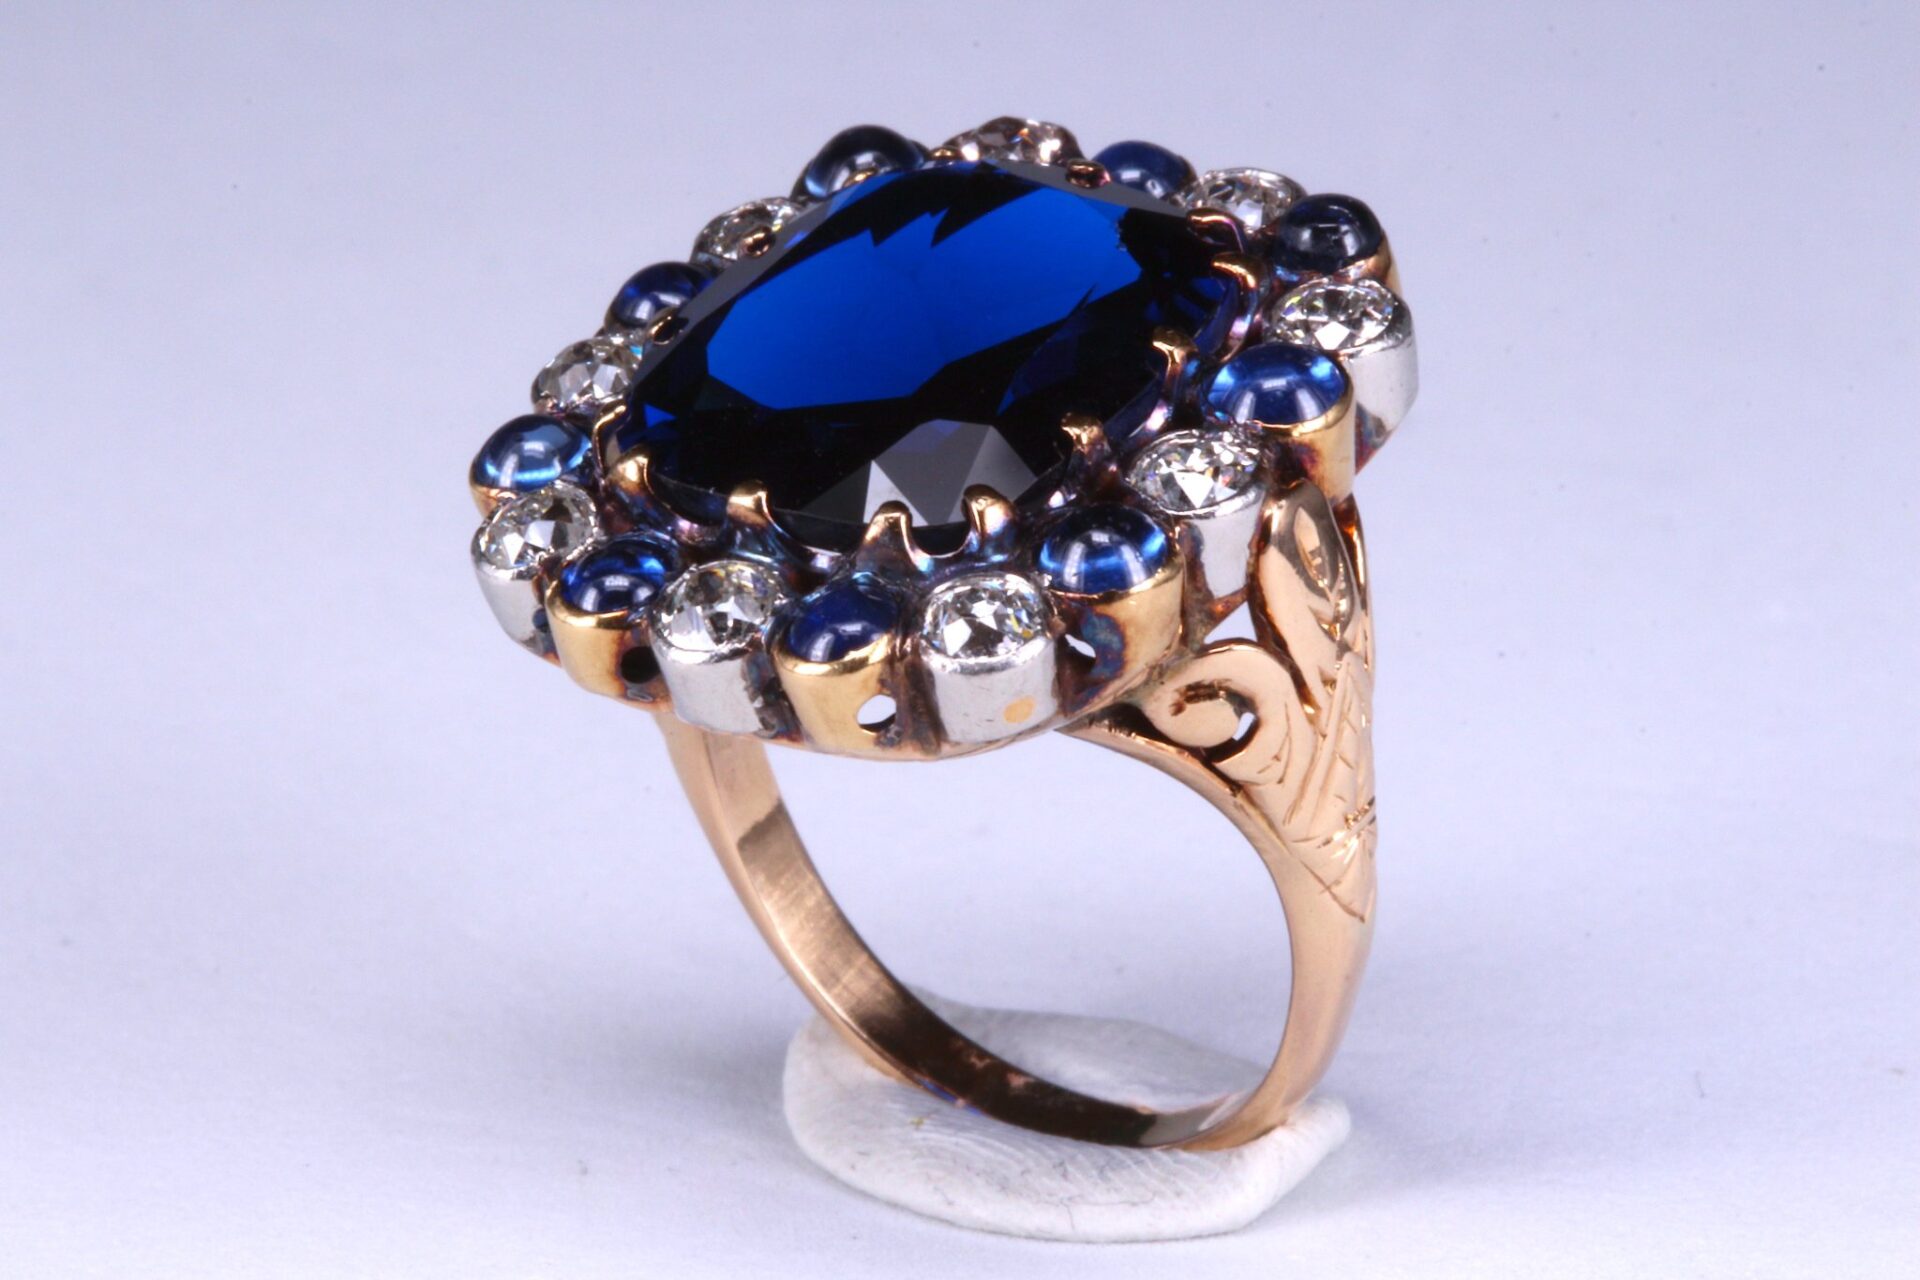 Sell a Sapphire Ring